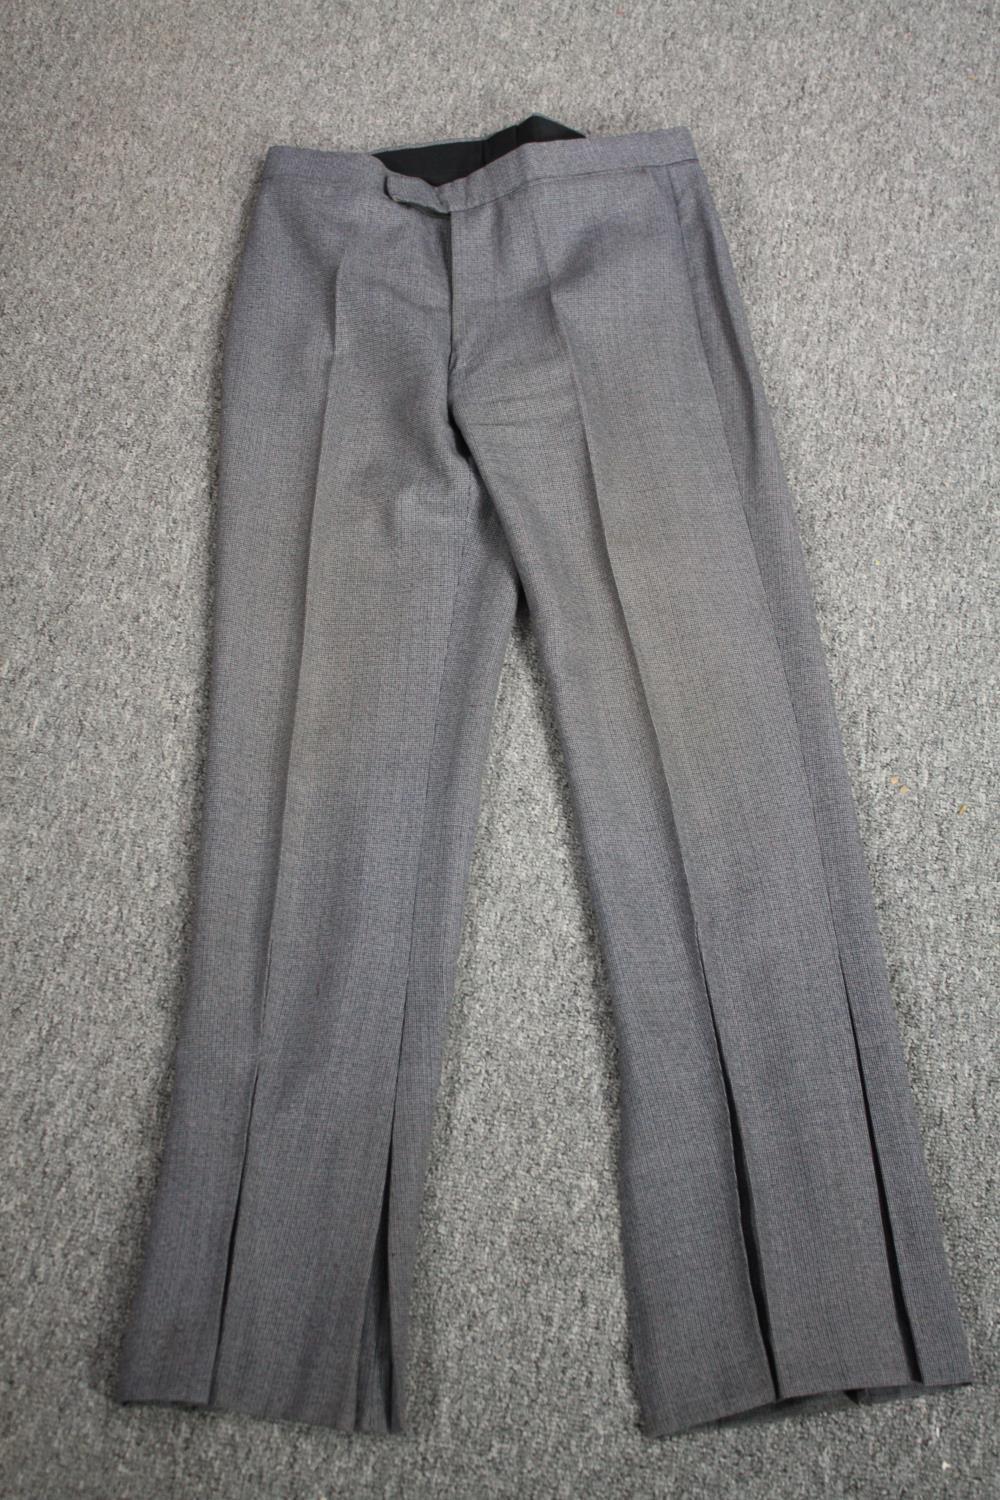 A bespoke made vintage grey tone pin stripe and block design two piece suit with mother of pearl - Image 6 of 6